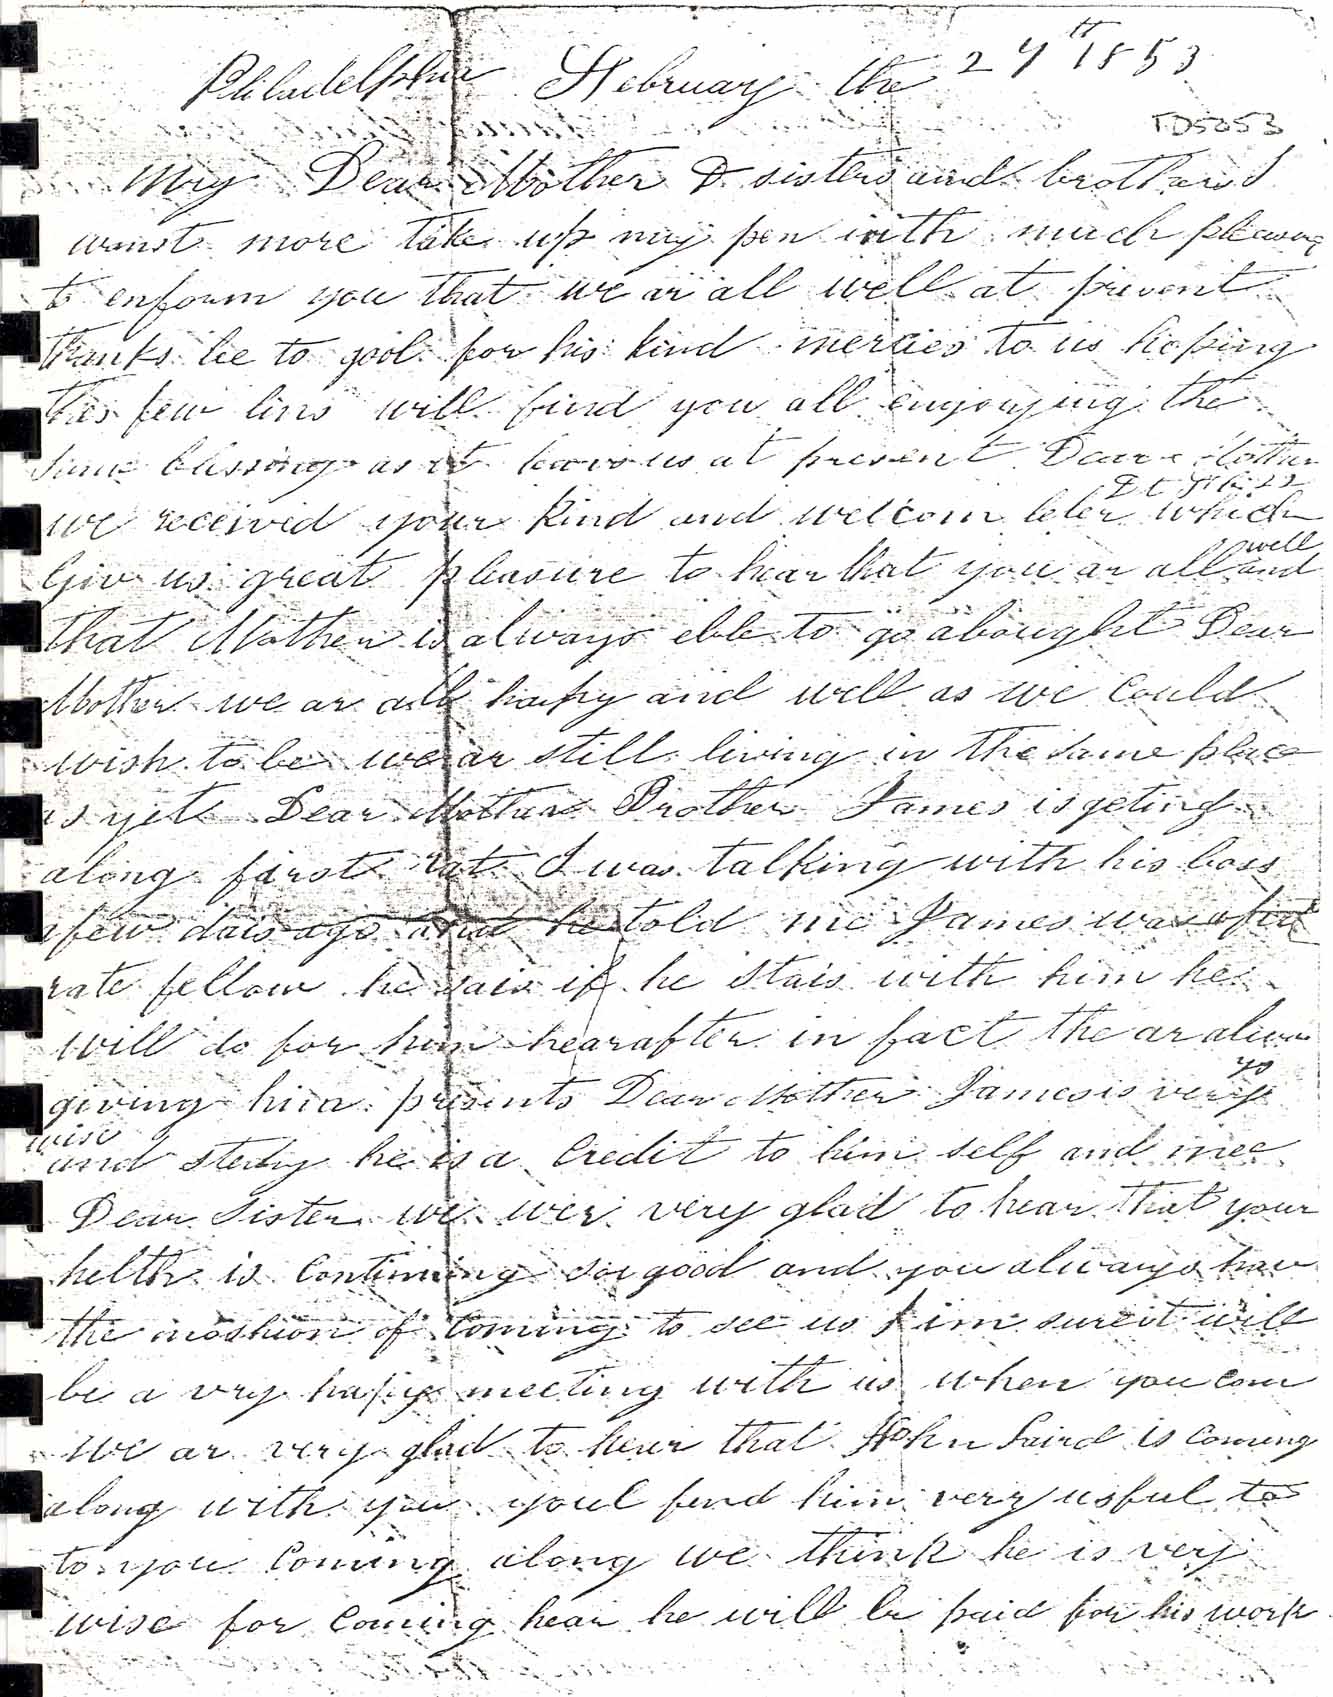 Elagh Laird - Letter 2 Page 1